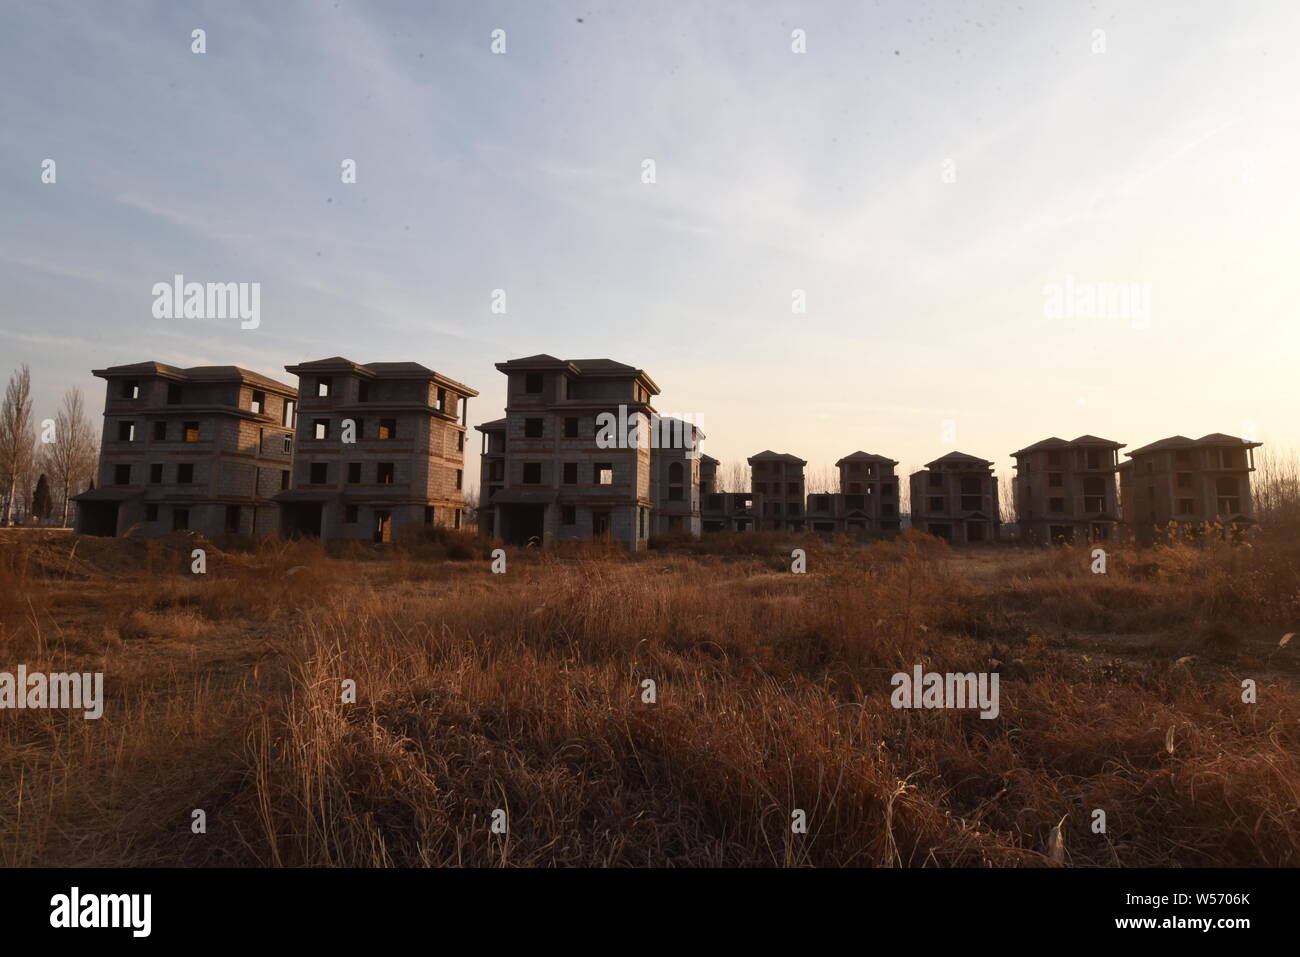 A view of a ghost town with unfinished complex including a boat-shaped building in Yangxin county, Binzhou city, east China's Shandong province, 17 Fe Stock Photo